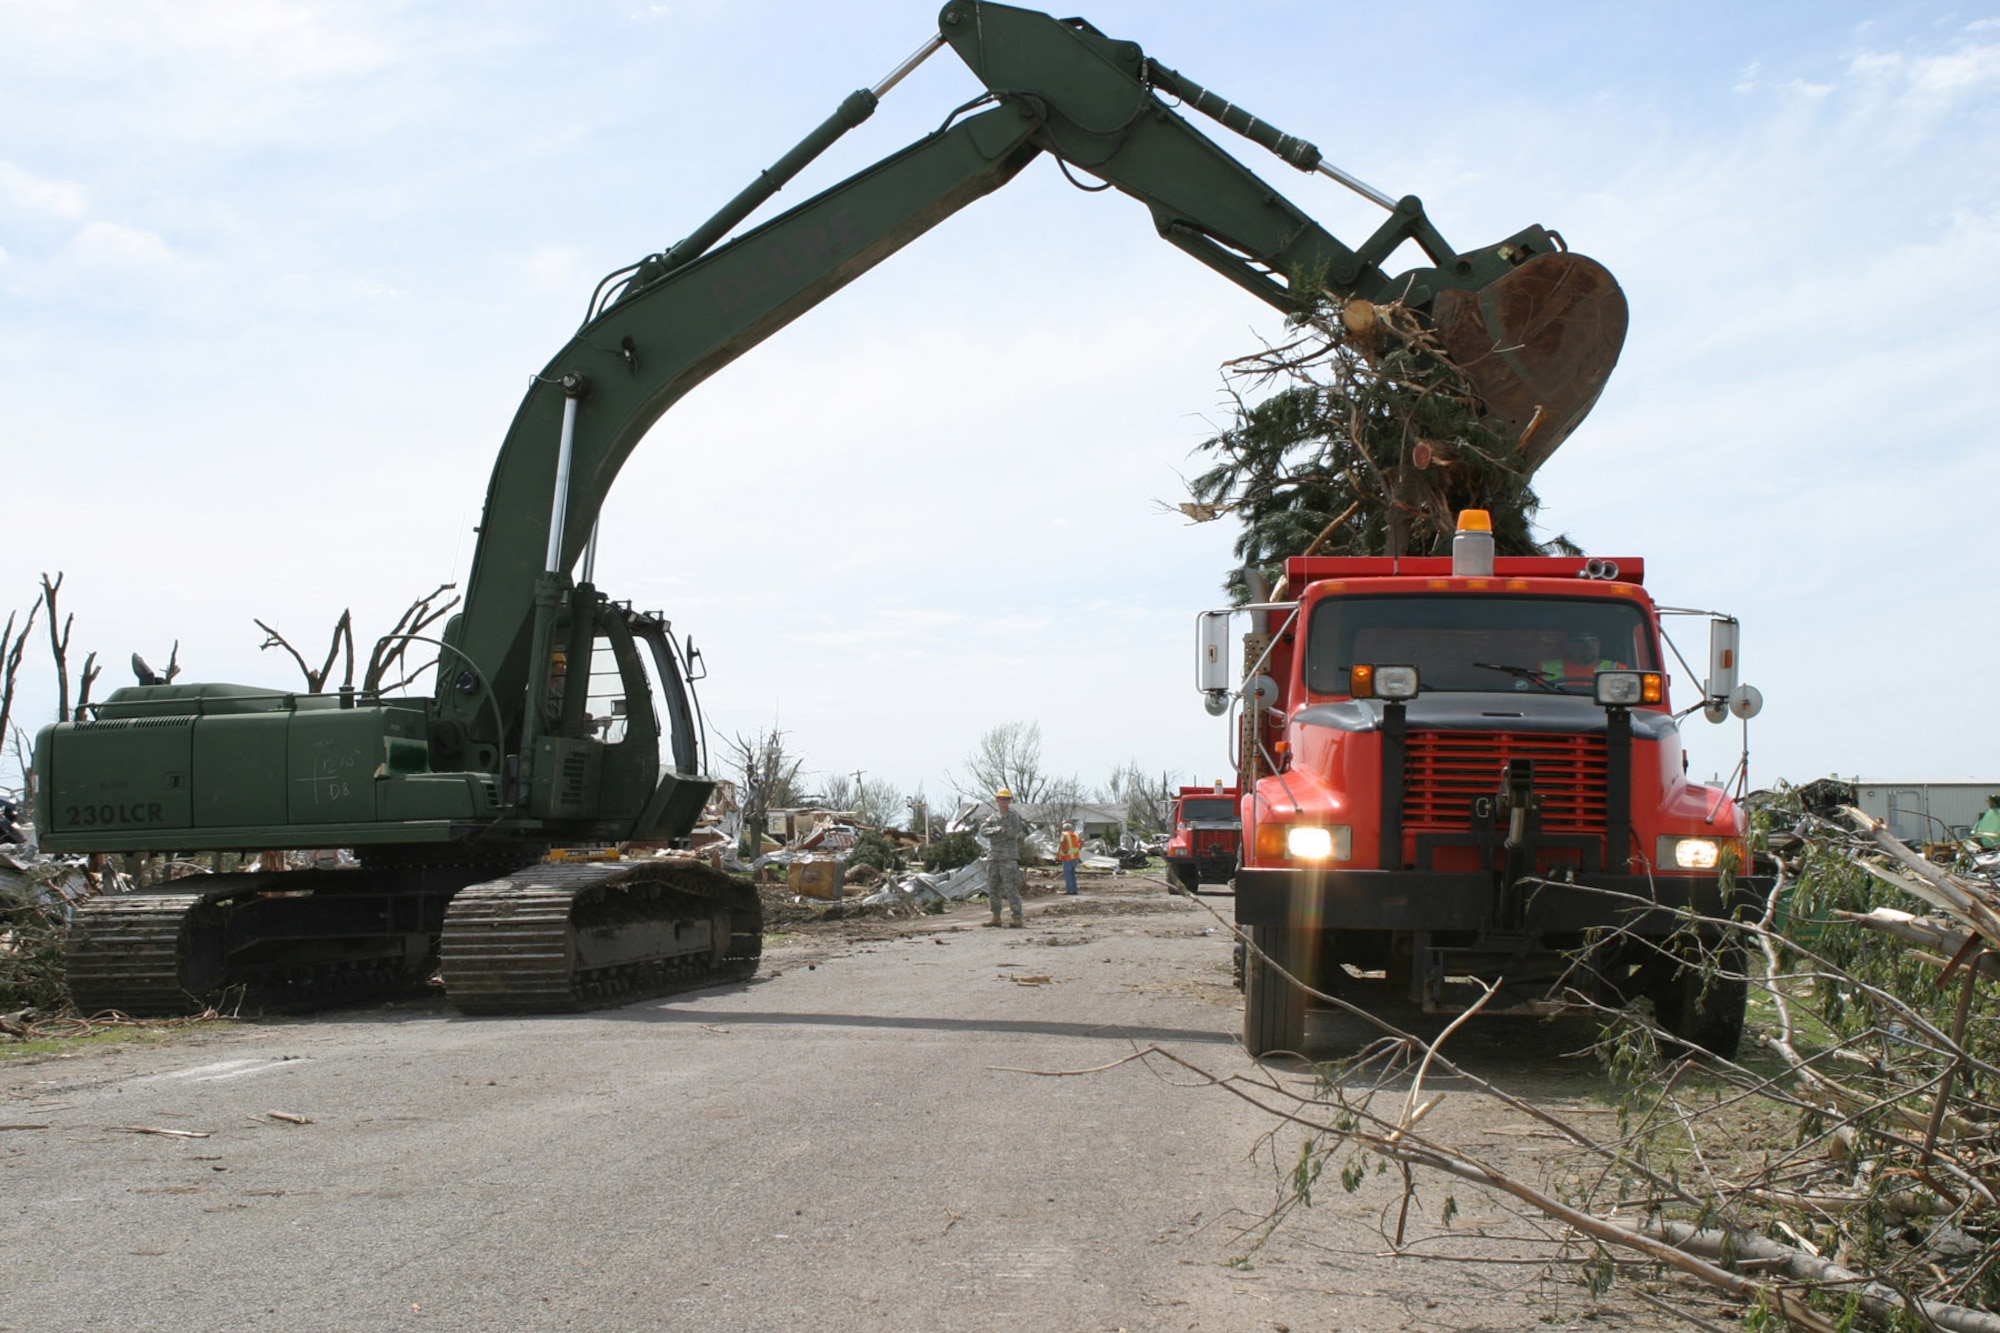 Engineers from the Kansas Army National Guard and the Kansas Department of Transportation work together to restore order to Greensburg. (Photo by Army Sgt. Heather Wright)